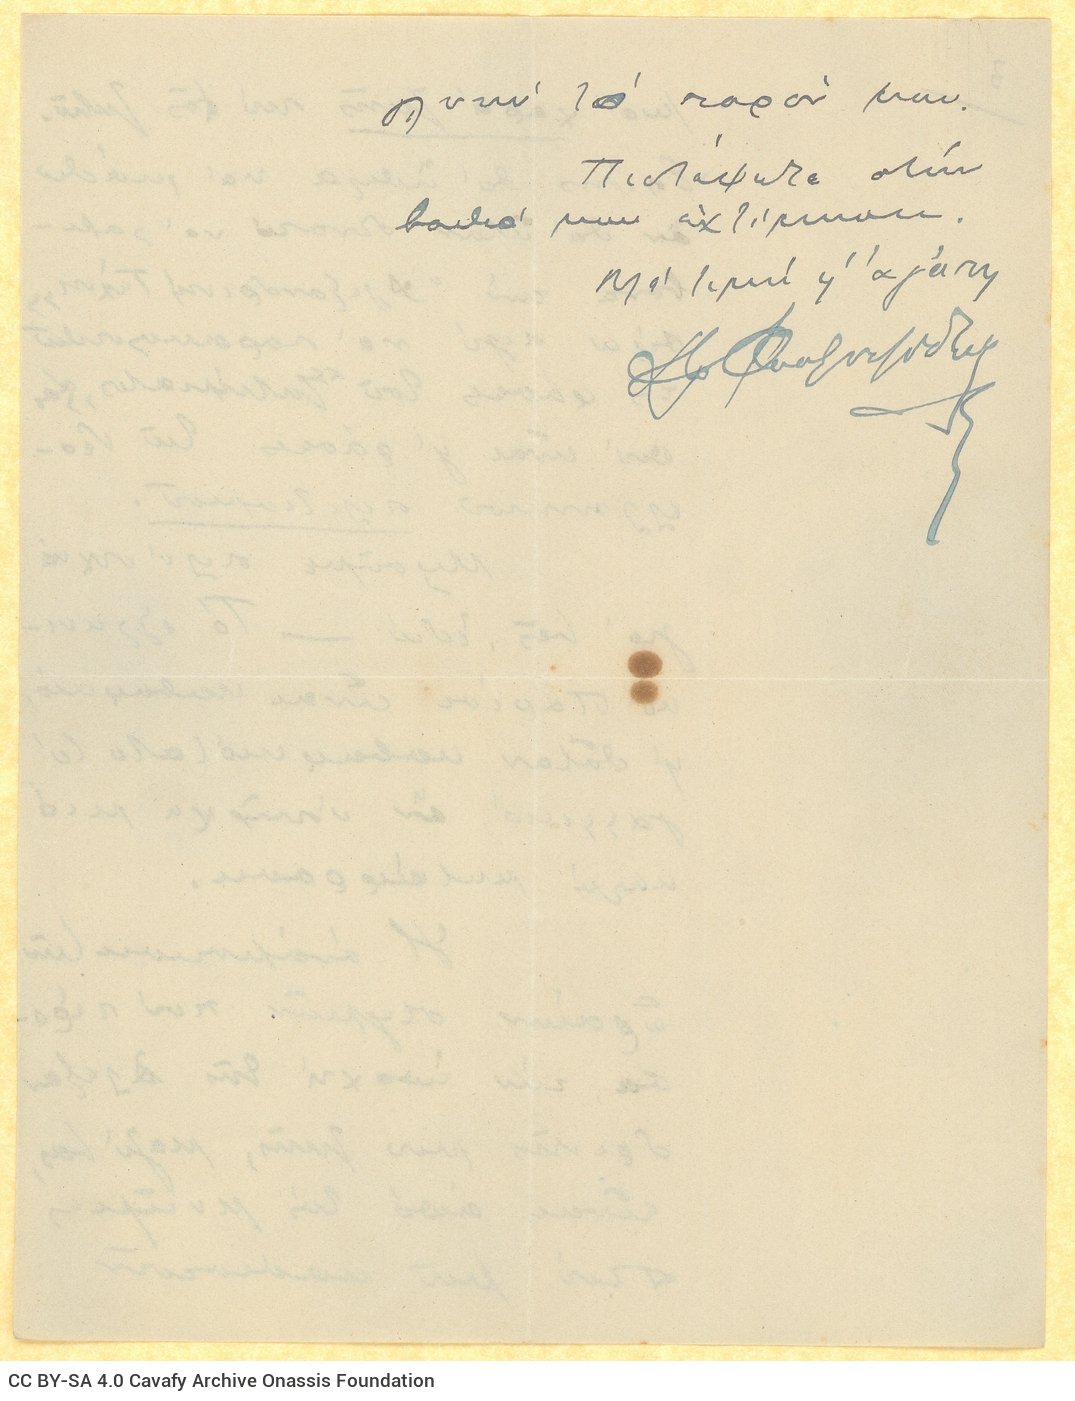 Handwritten letter by Irakleios Fysentzidis to Cavafy, in which he expresses his admiration for his work and asks to be sent 